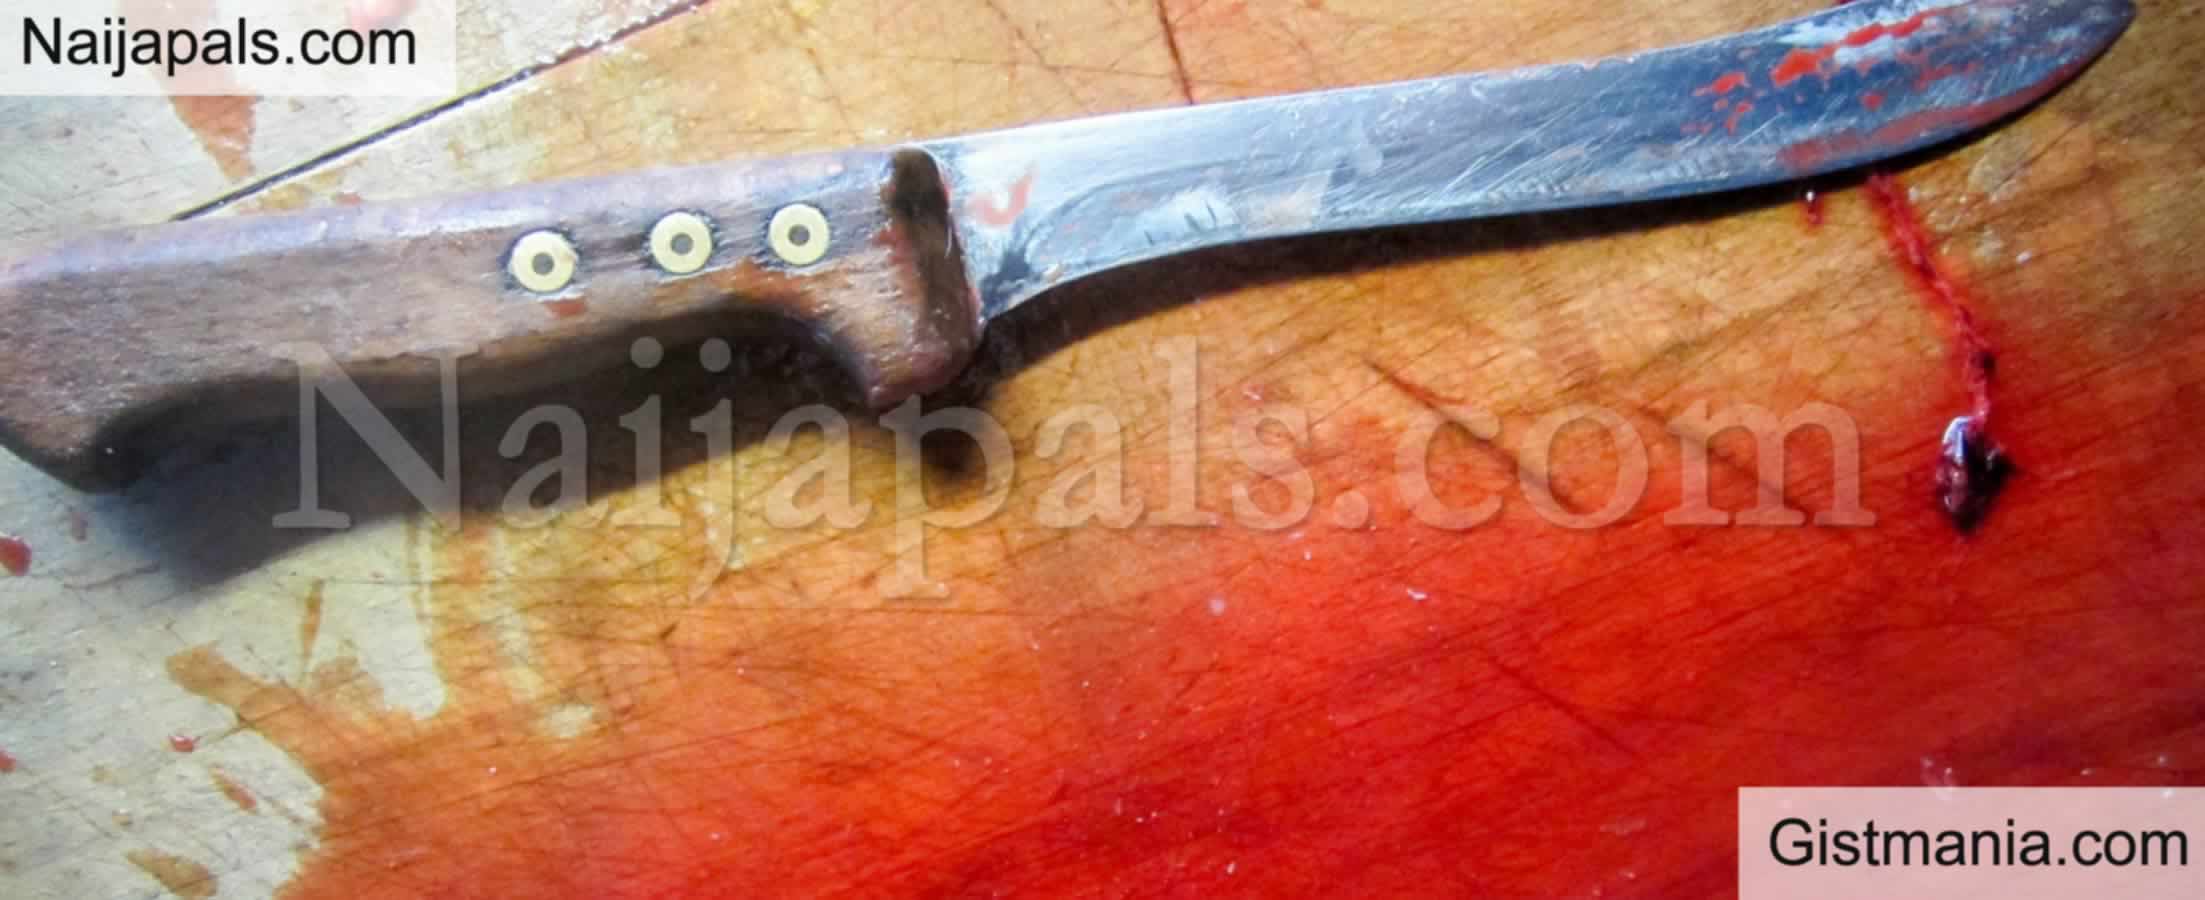 Horror As Neighbour, Cynthia Stabs Housewife To Death In Lagos During Altercation